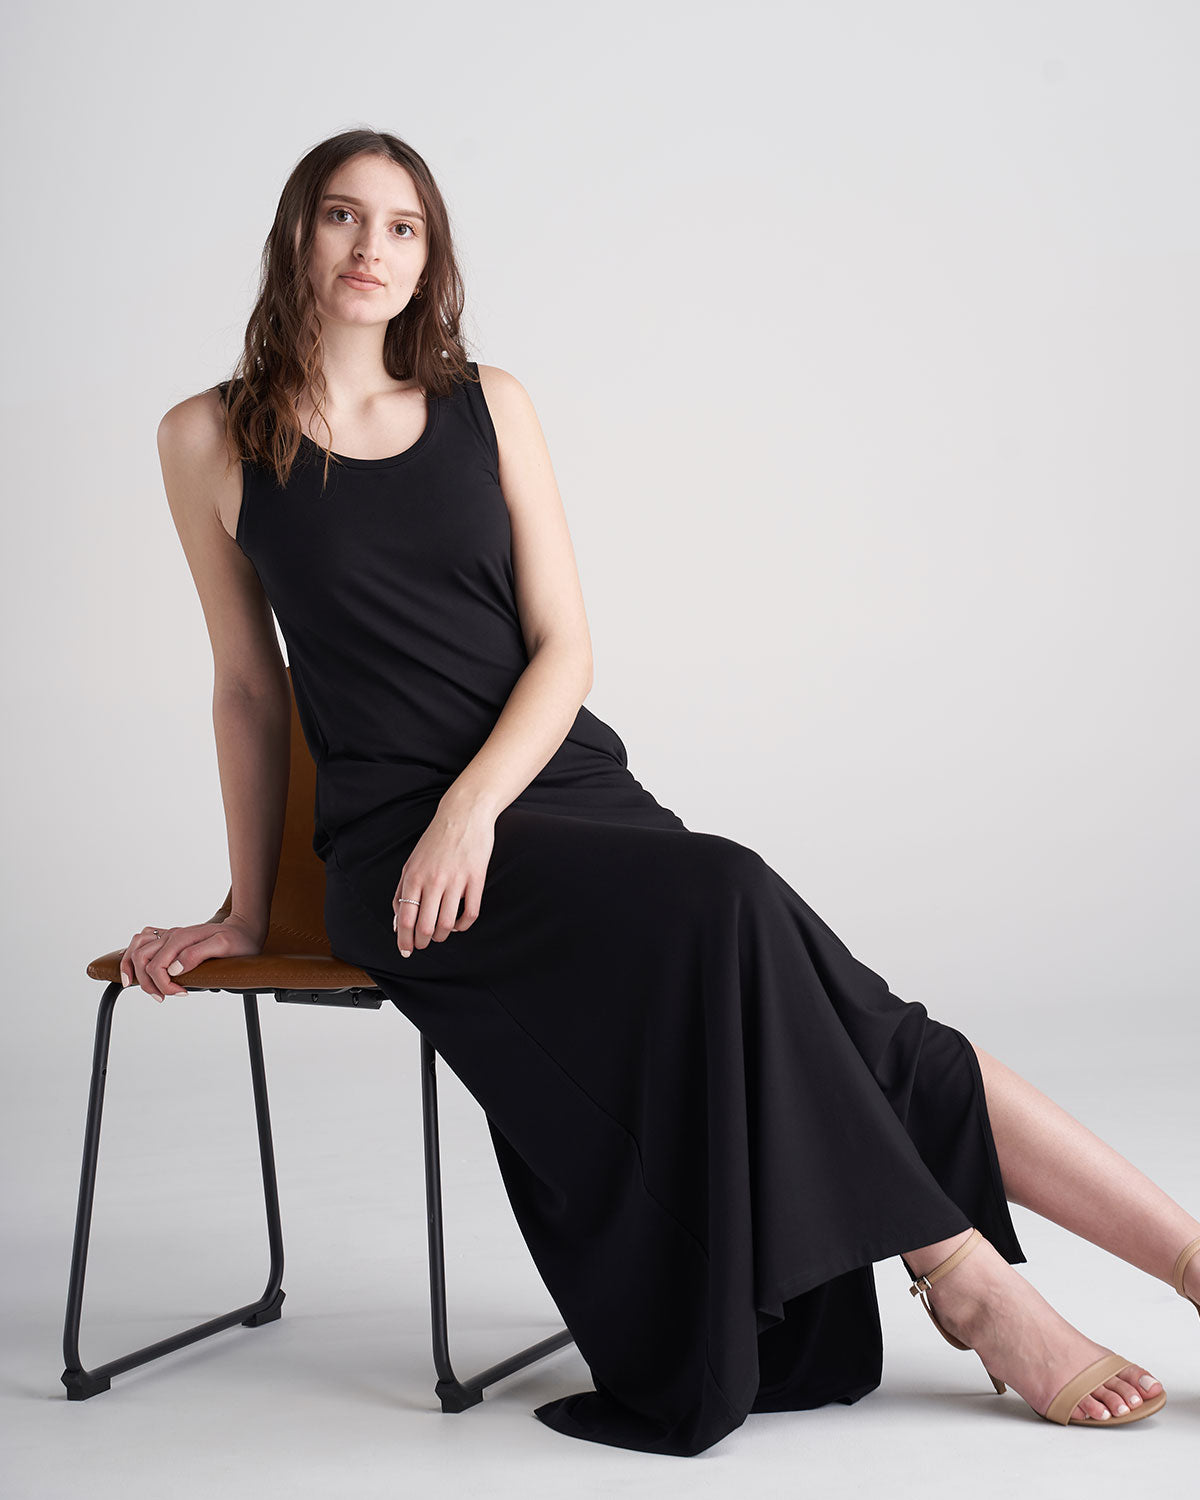 Clothes for Tall Women - Styling Maxi Dresses for Tall Women – American Tall